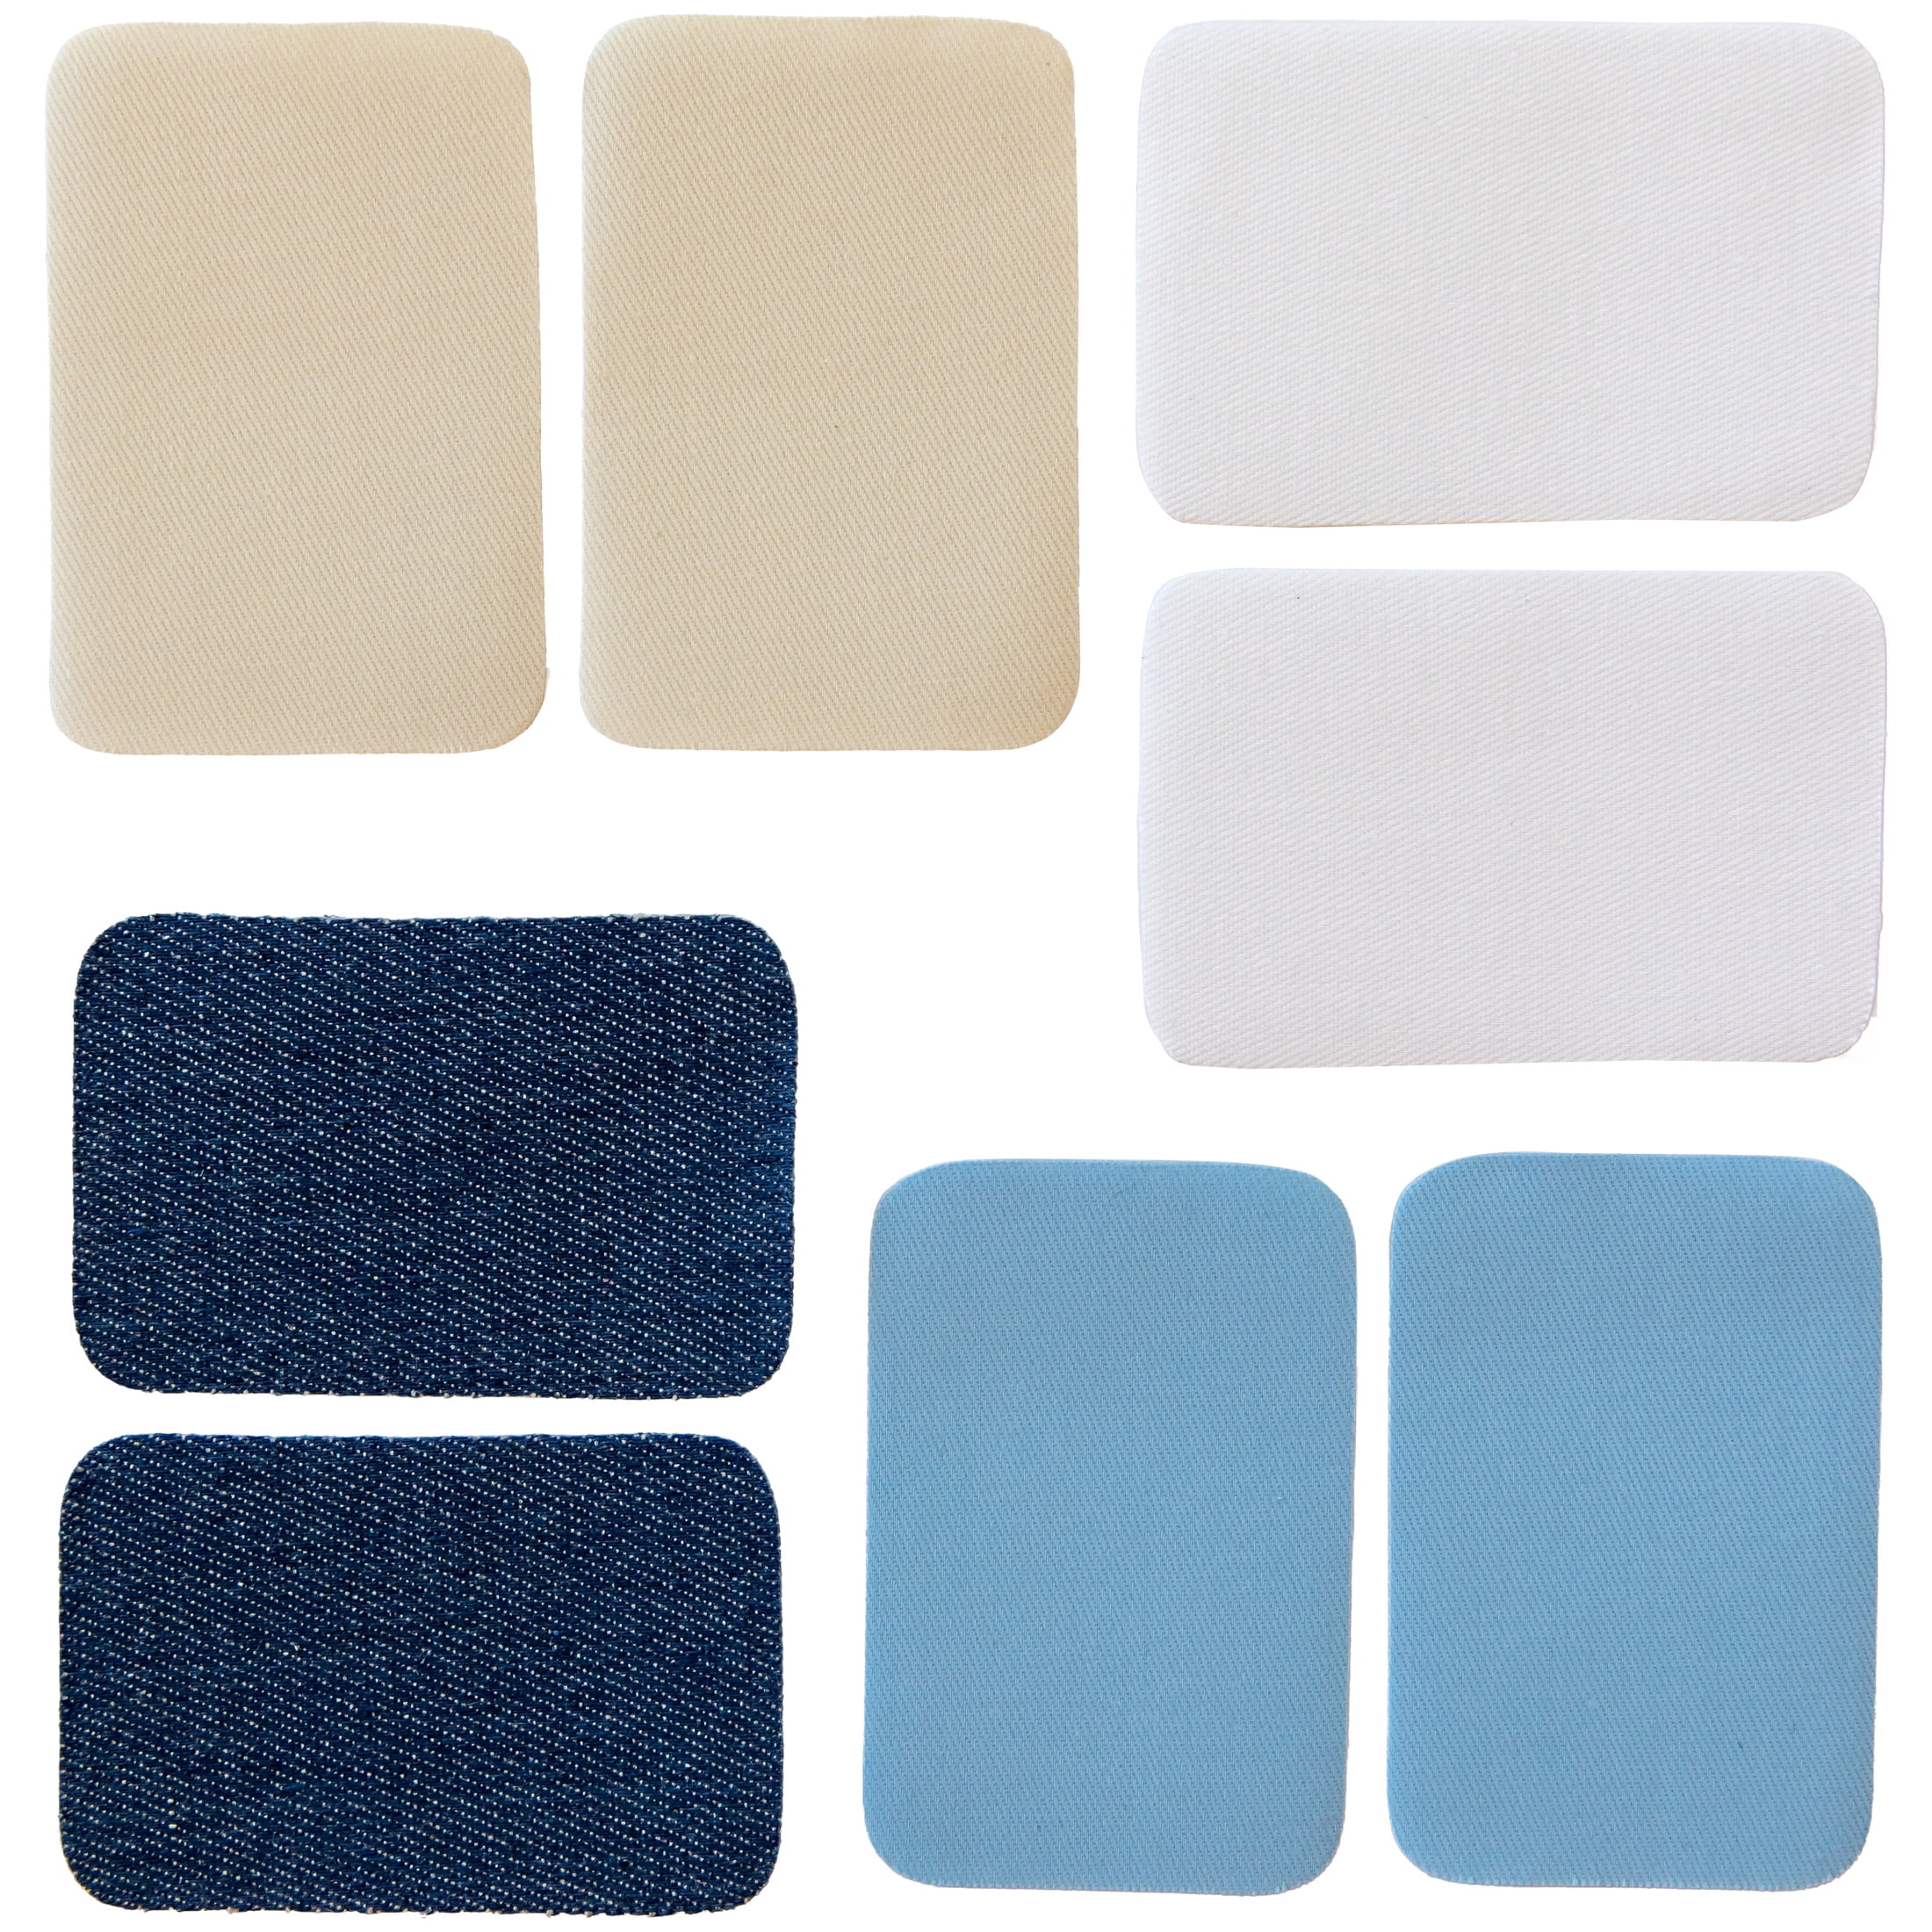 Bondex Faded Blue Denim 5x7 Fabric Iron-On Patches, 2 Pieces